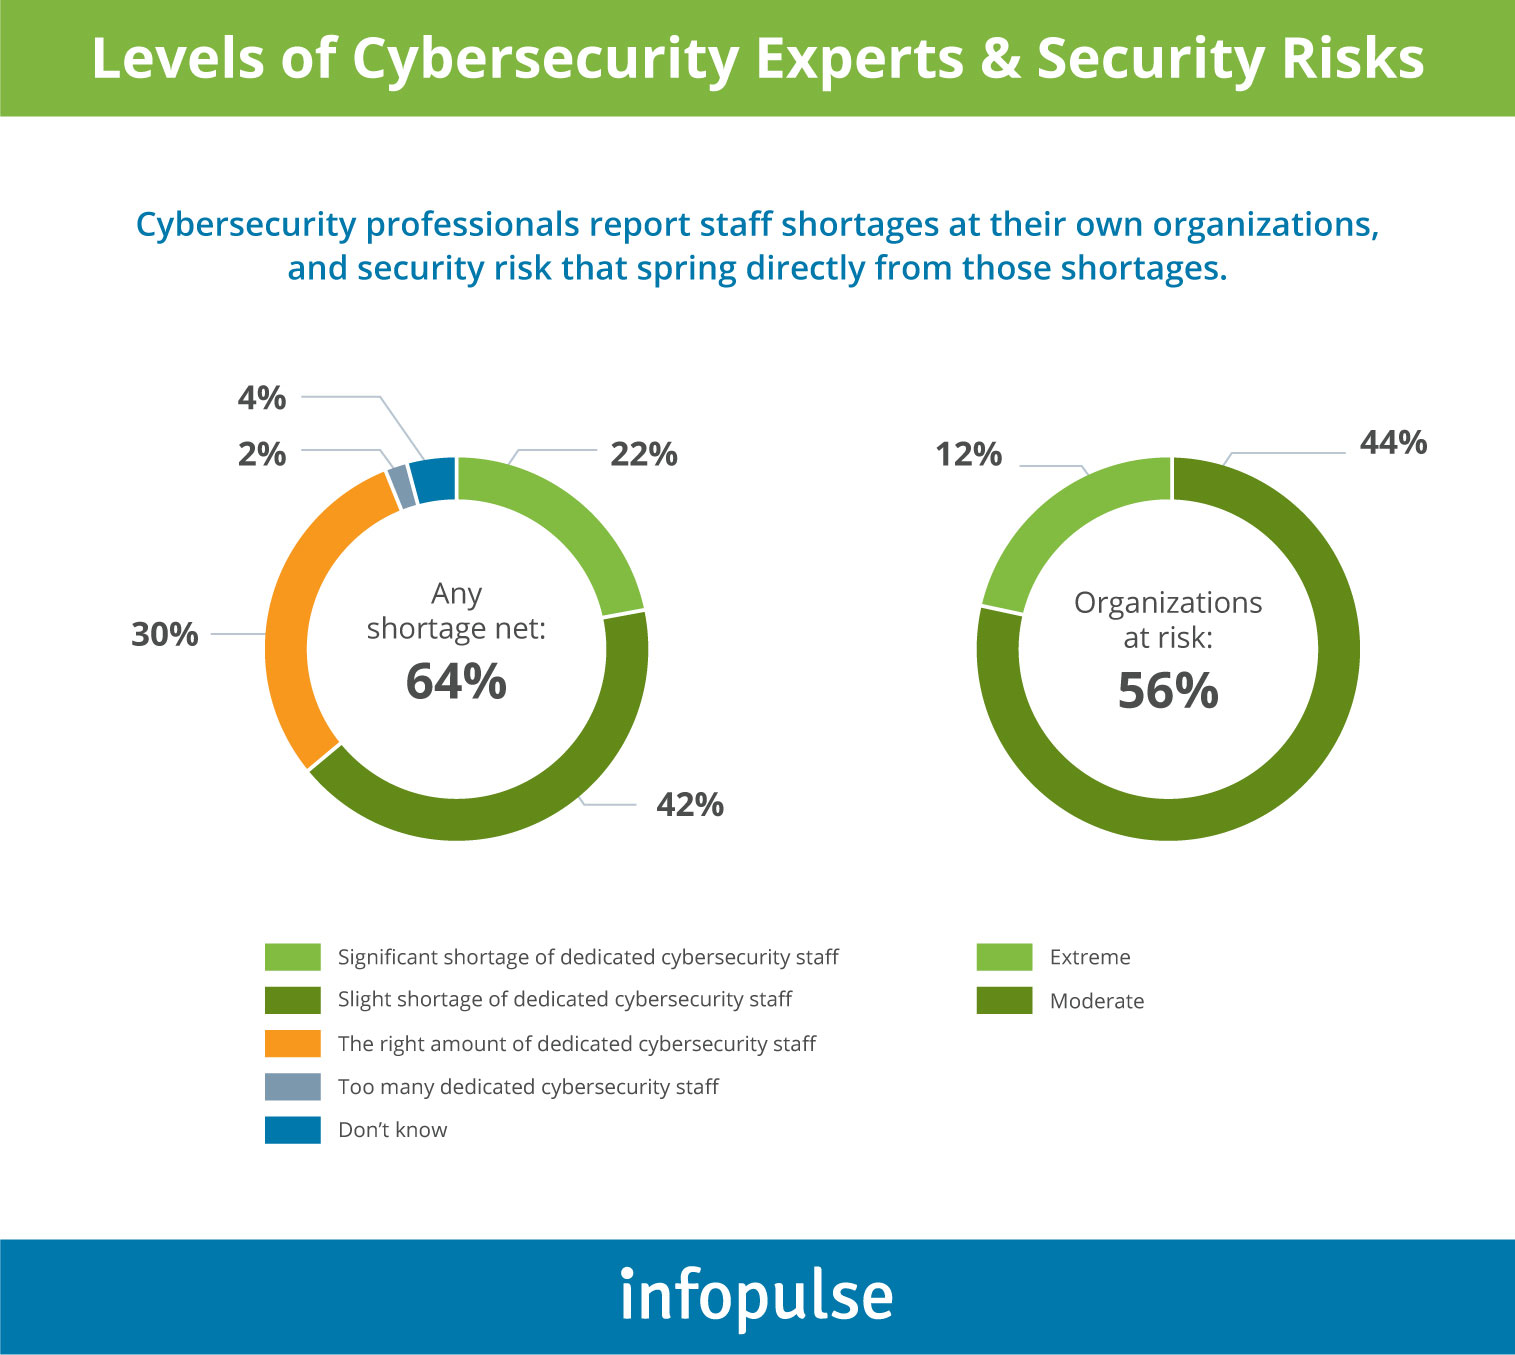 Levels of Cybersecurity Experts &amp; Security Risks - Infopulse - 1